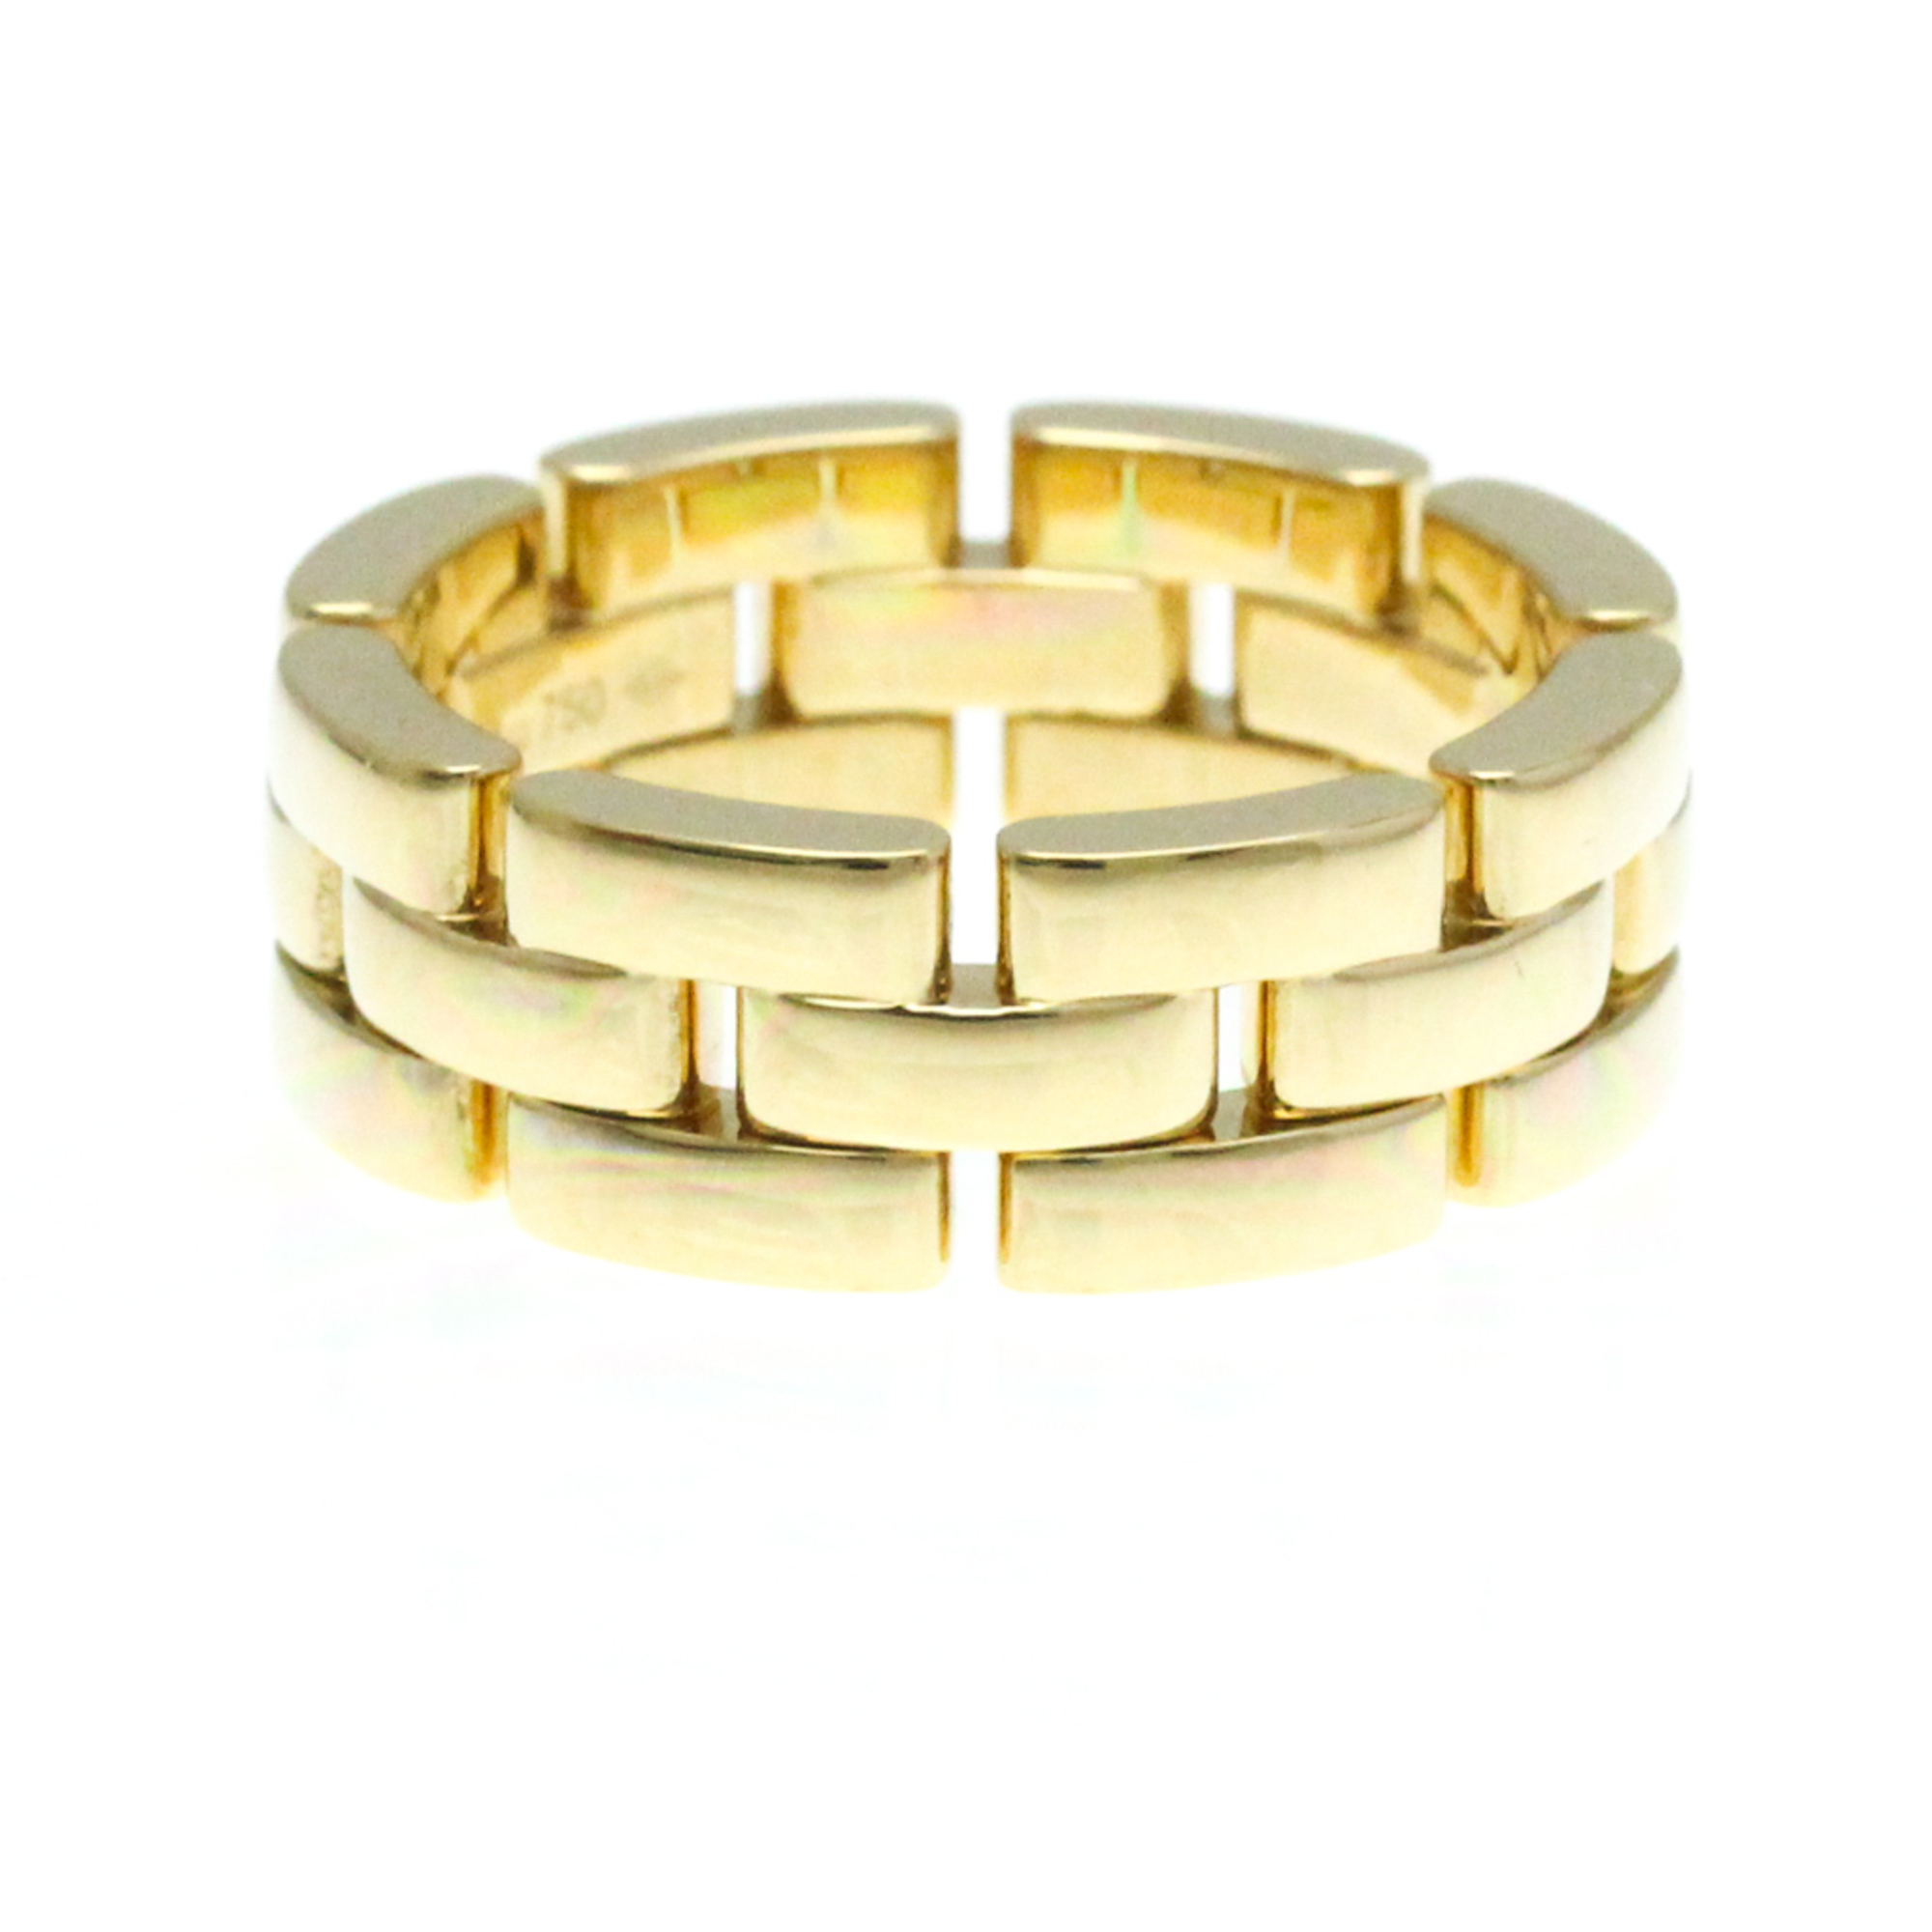 Cartier Maillon Panthère Ring Yellow Gold (18K) Fashion No Stone Band Ring Gold